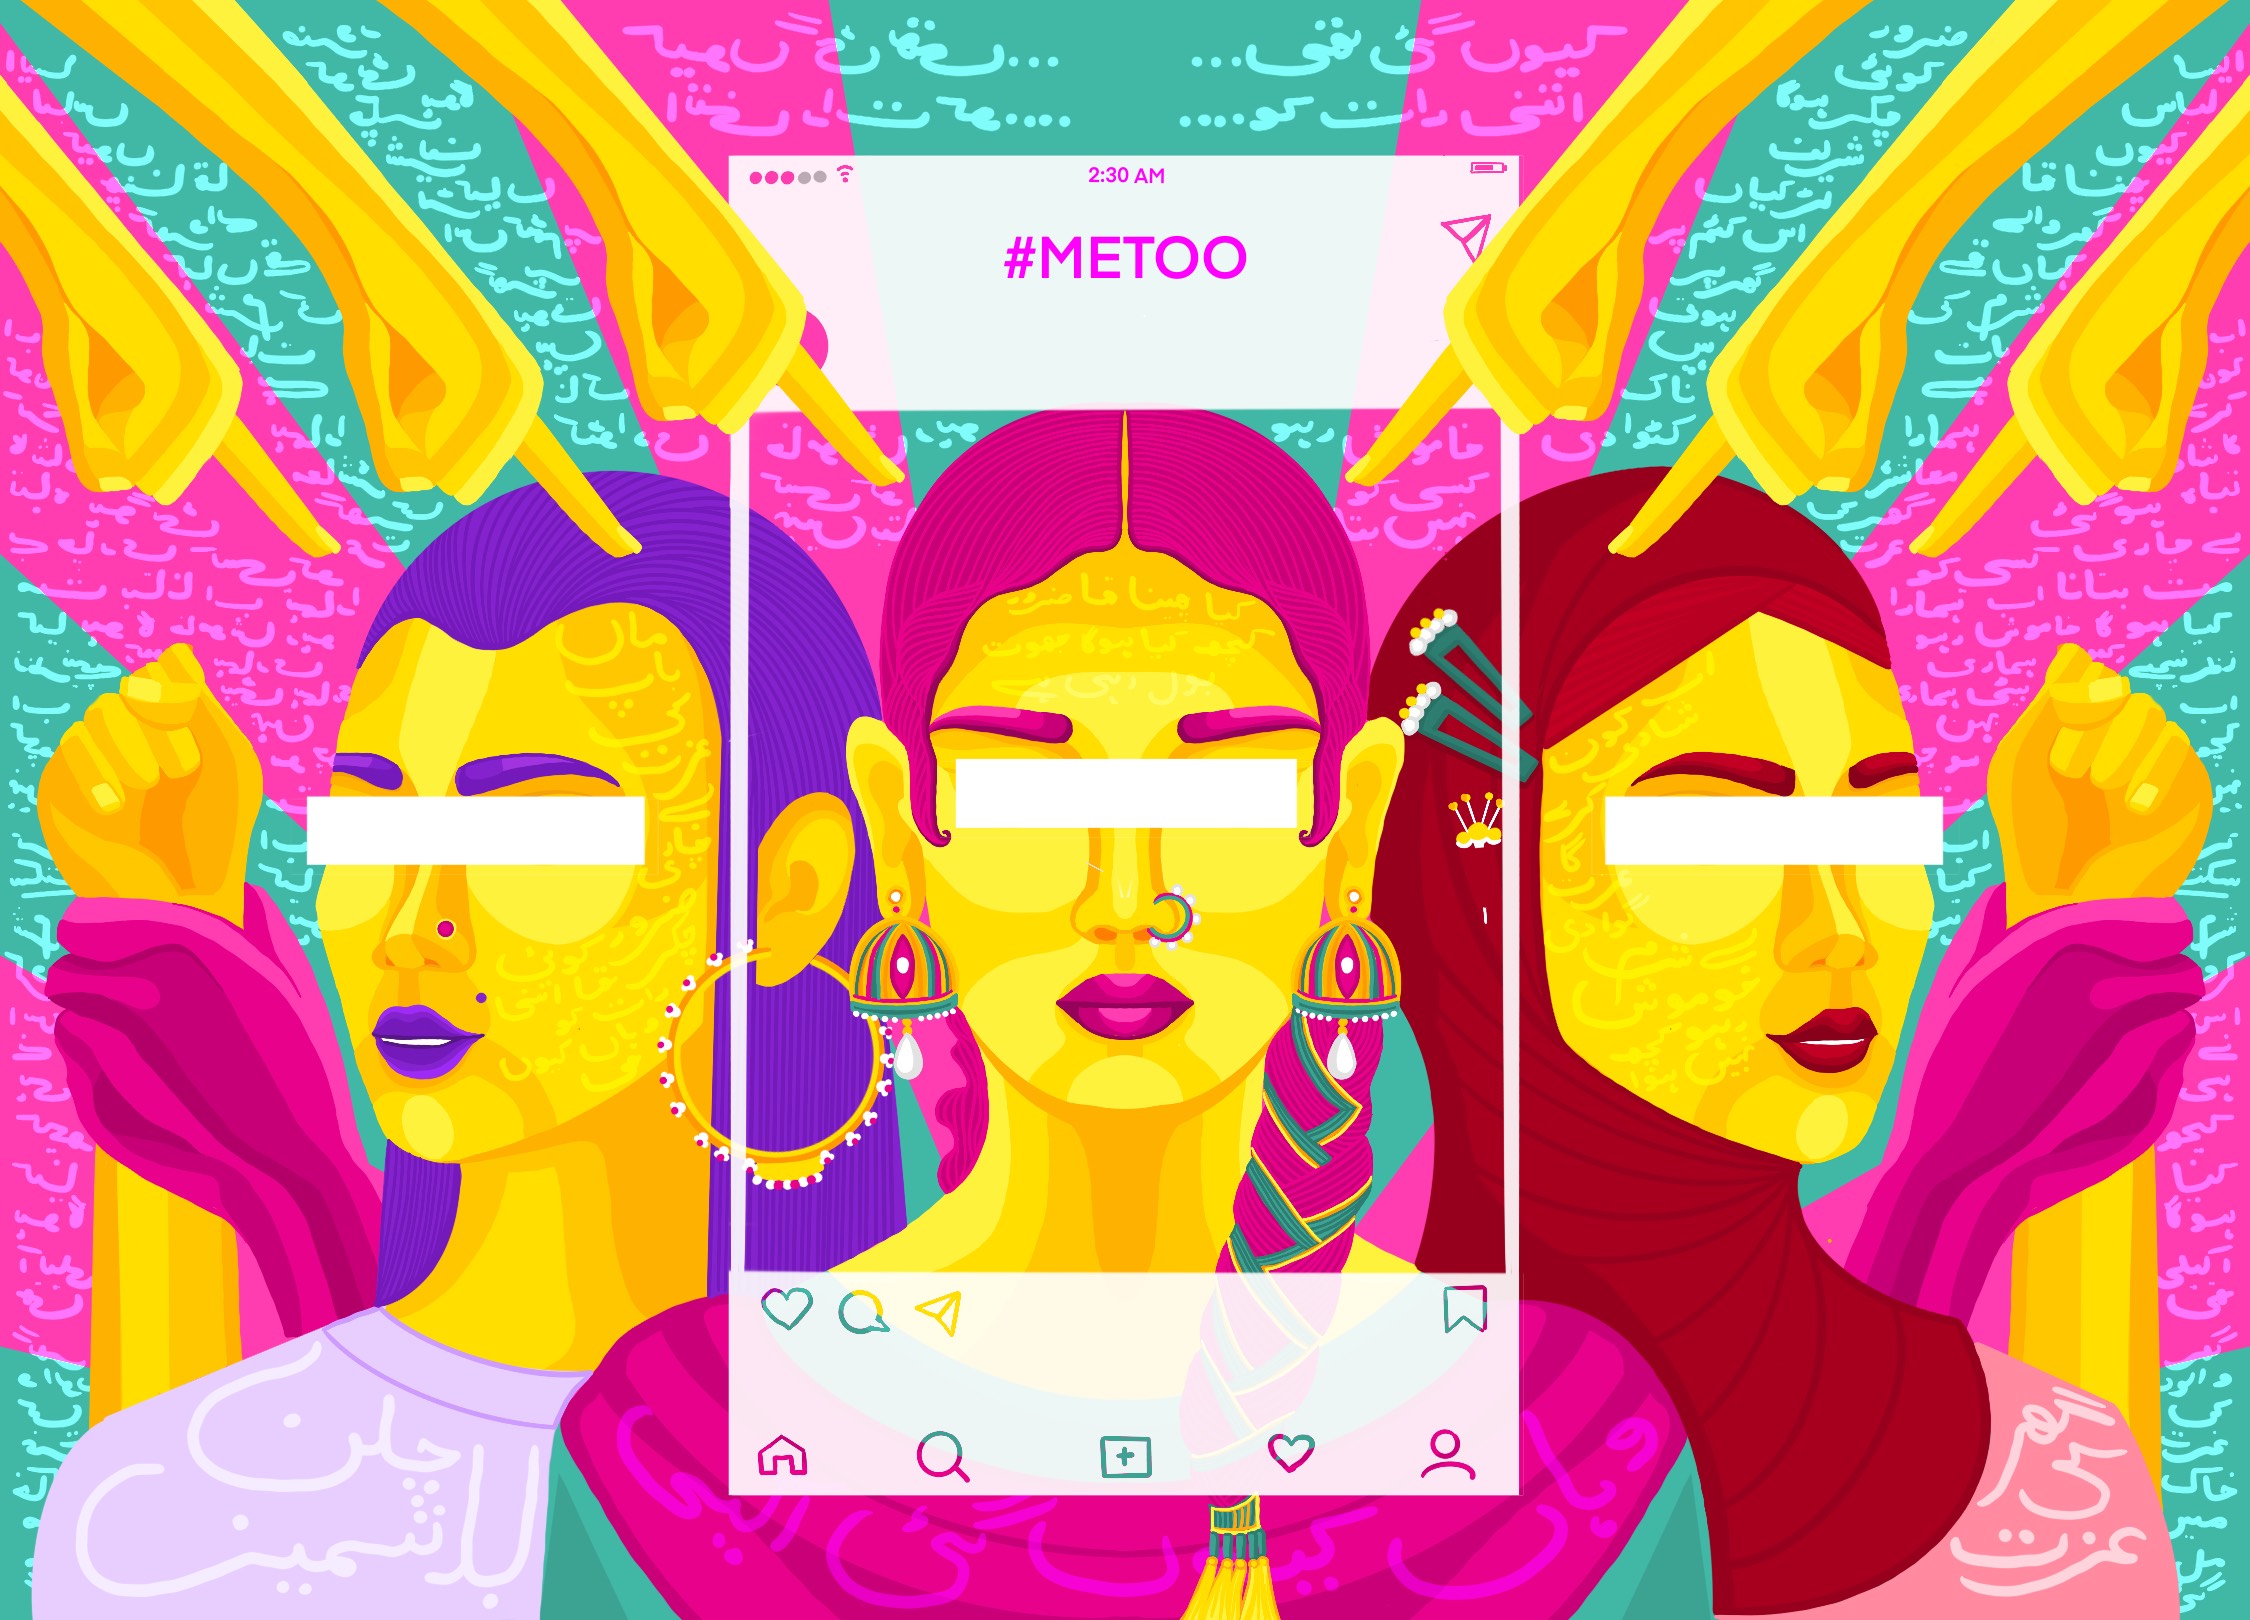 A hyper-colourful hand-drawn illustration showing three Pakistani women with their eyes obscured to make them anonymous. Fingers point at them from the top. At the sides are two raised fists